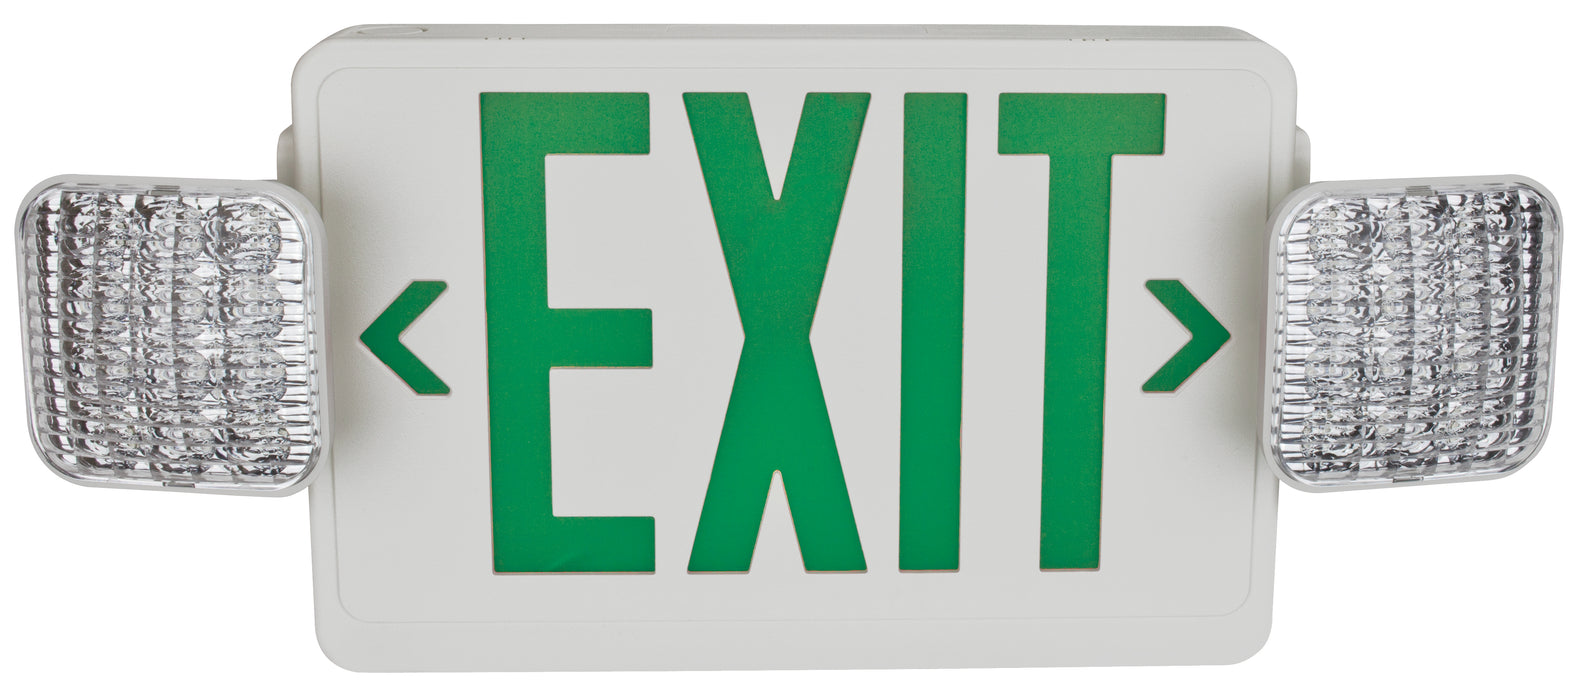 TCP Universal Combination Emergency Exit White Housing With Green Lettering Remote Capable (LED20785)